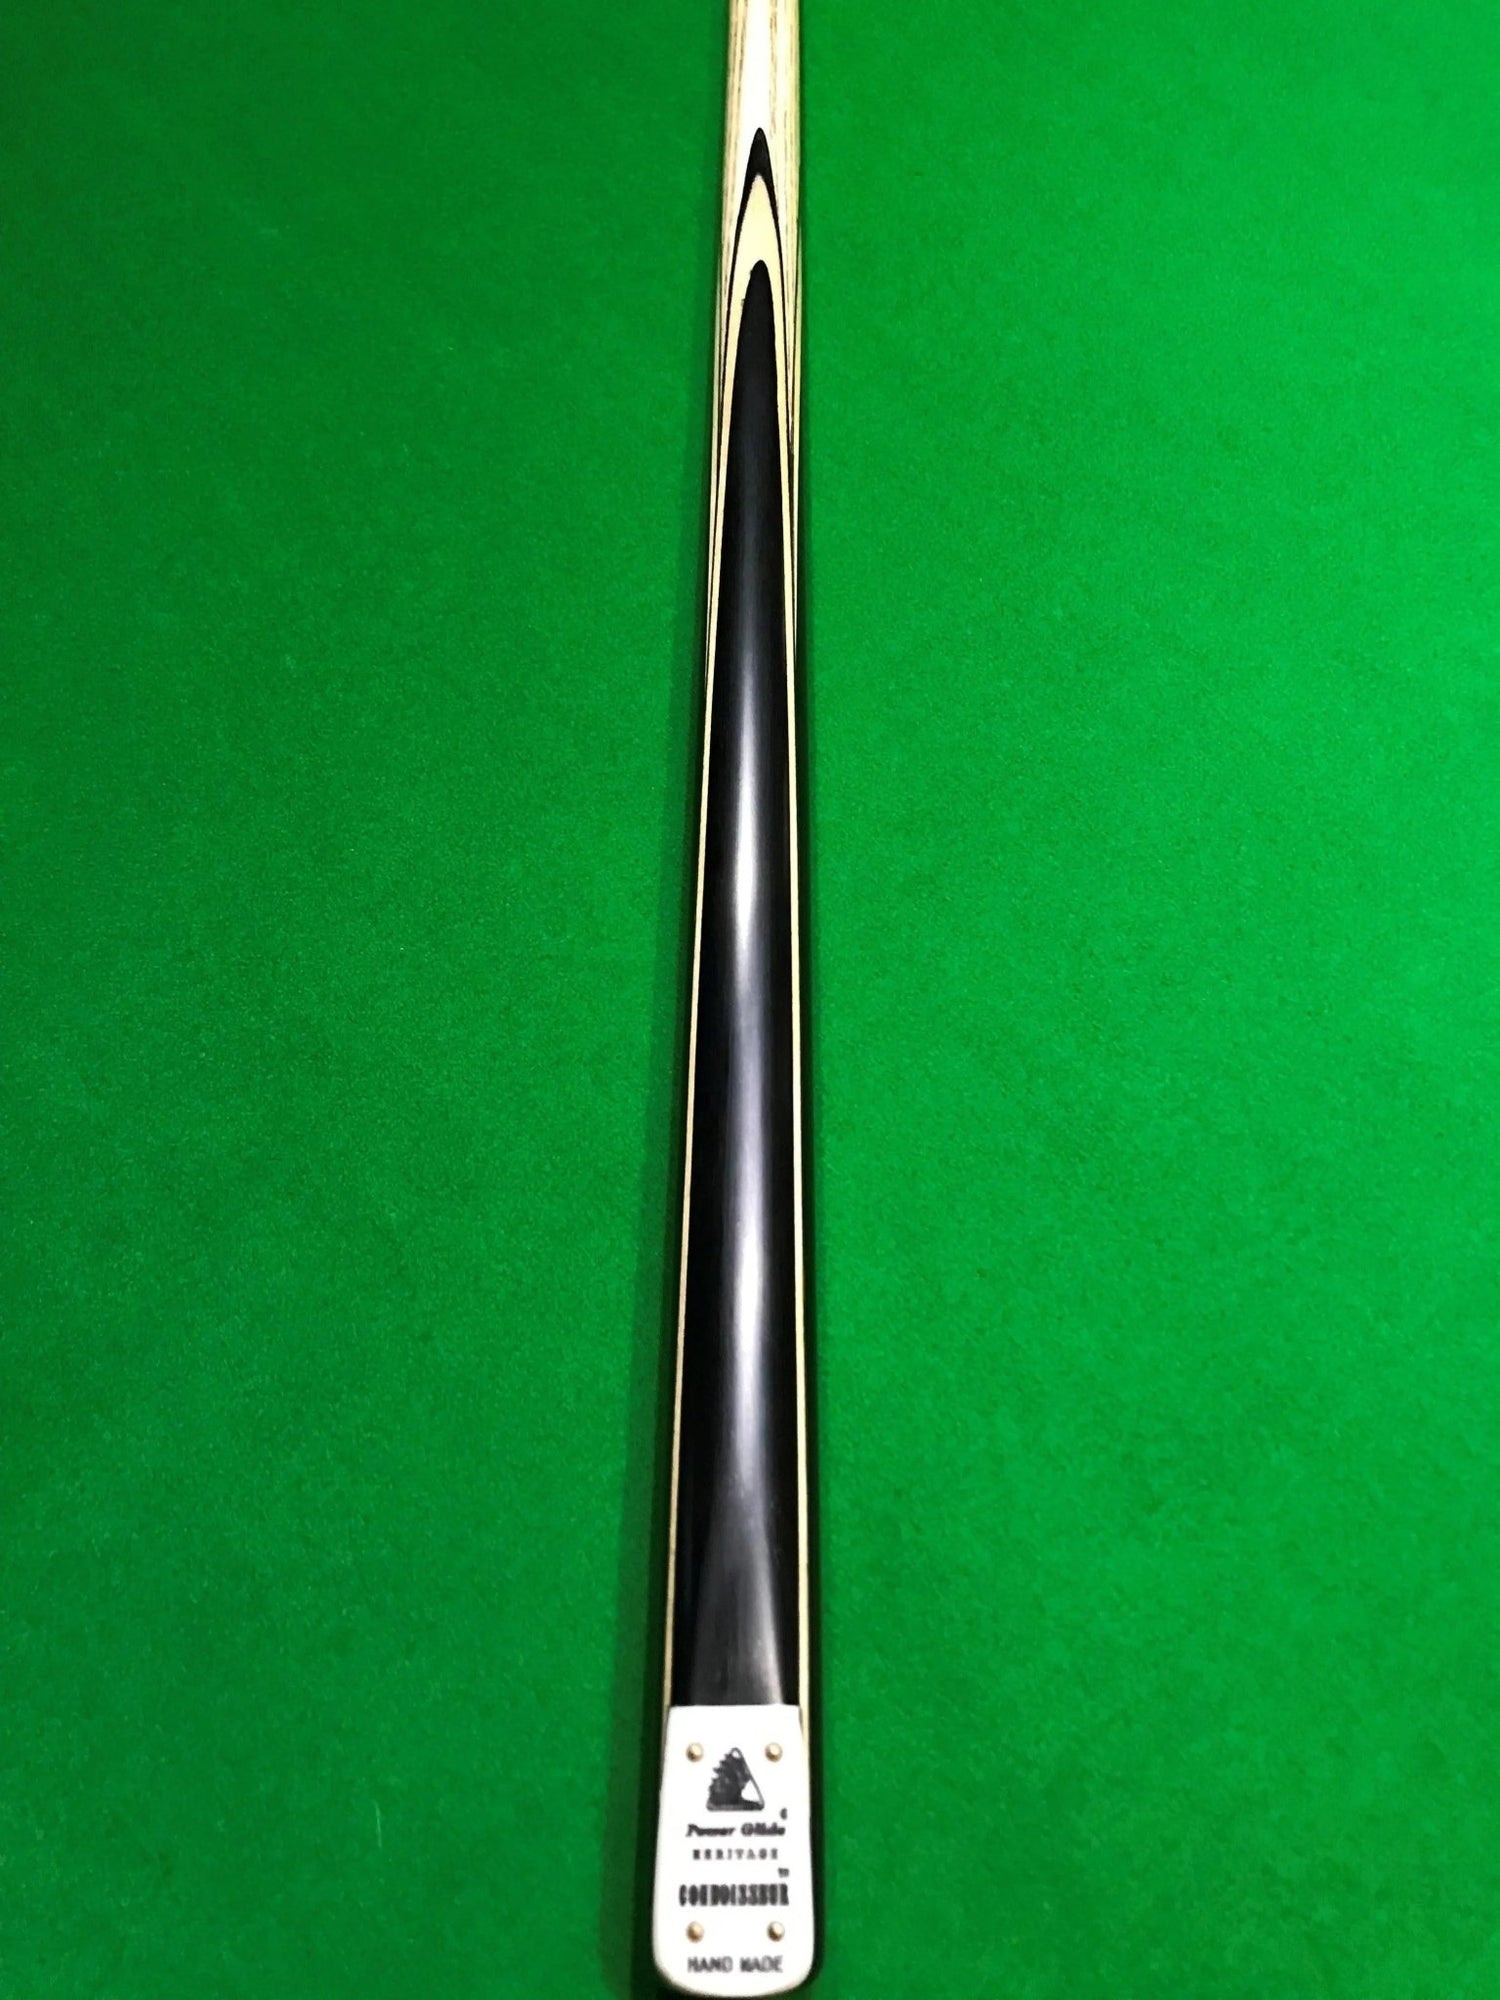 POWERGLIDE Heritage Connoisseur Hand Made 1/2 Piece Pool, Snooker & Billiard Ash Cue with Butt Extension - Q-Masters